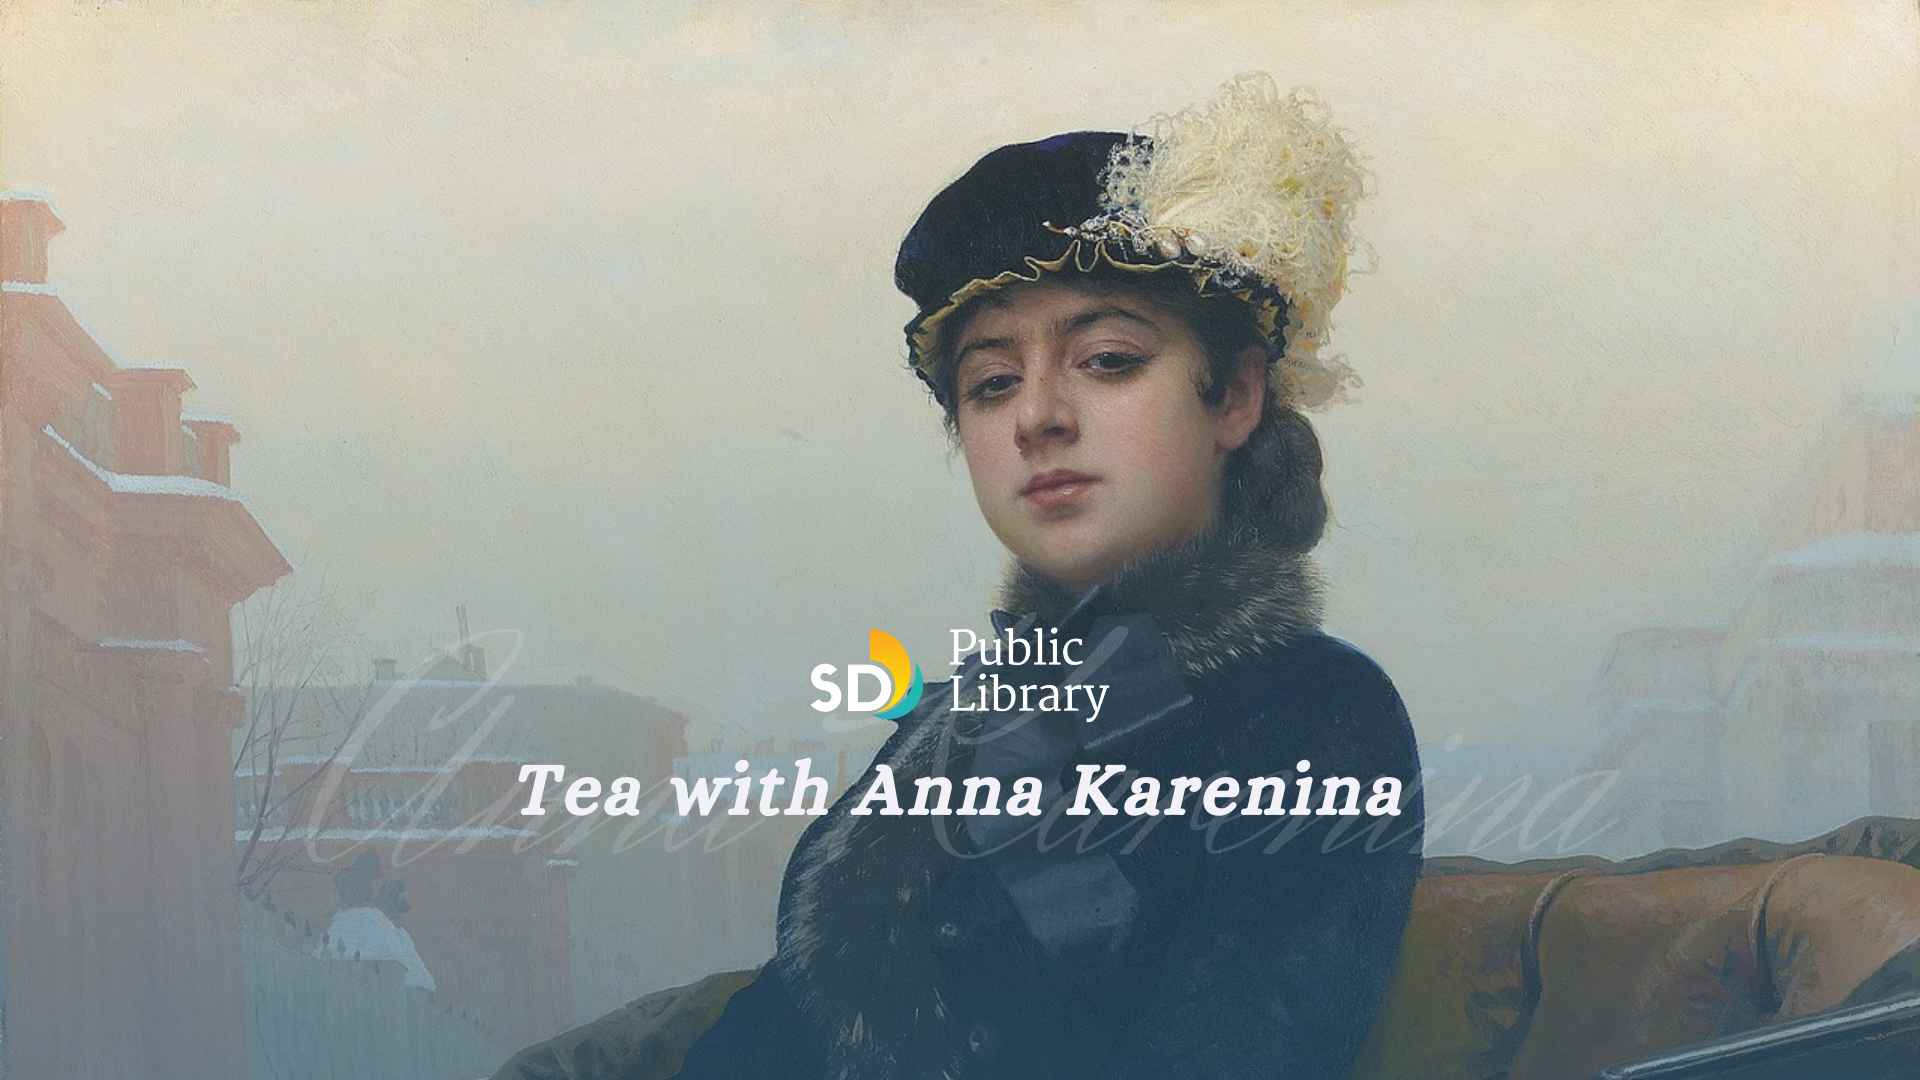 Woman in old-fashioned clothing and the text "Tea with Anna Karenina"